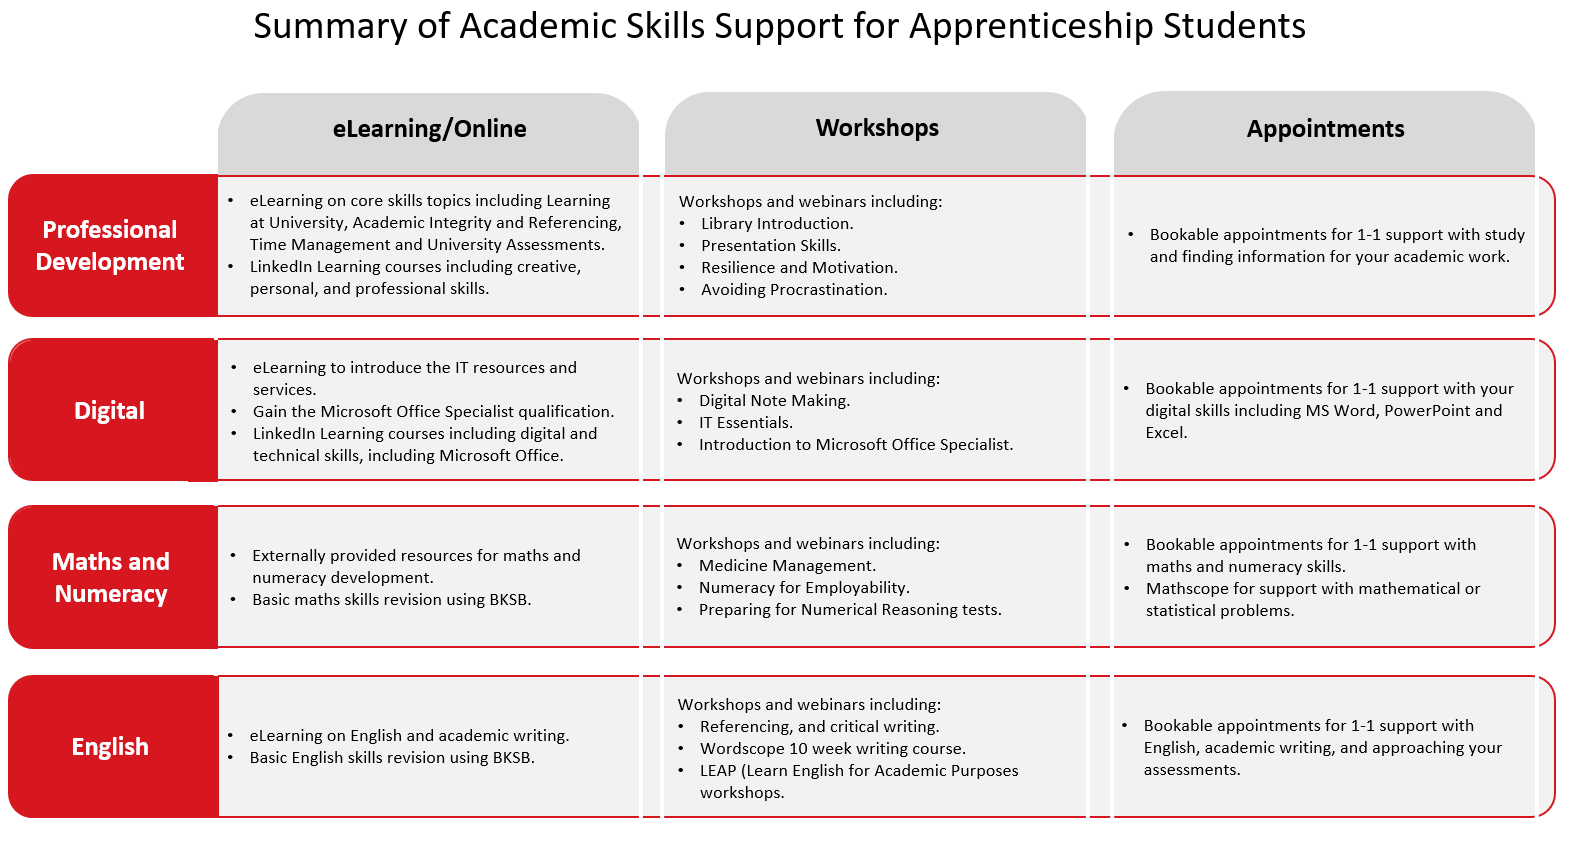 Outline of support for apprentices